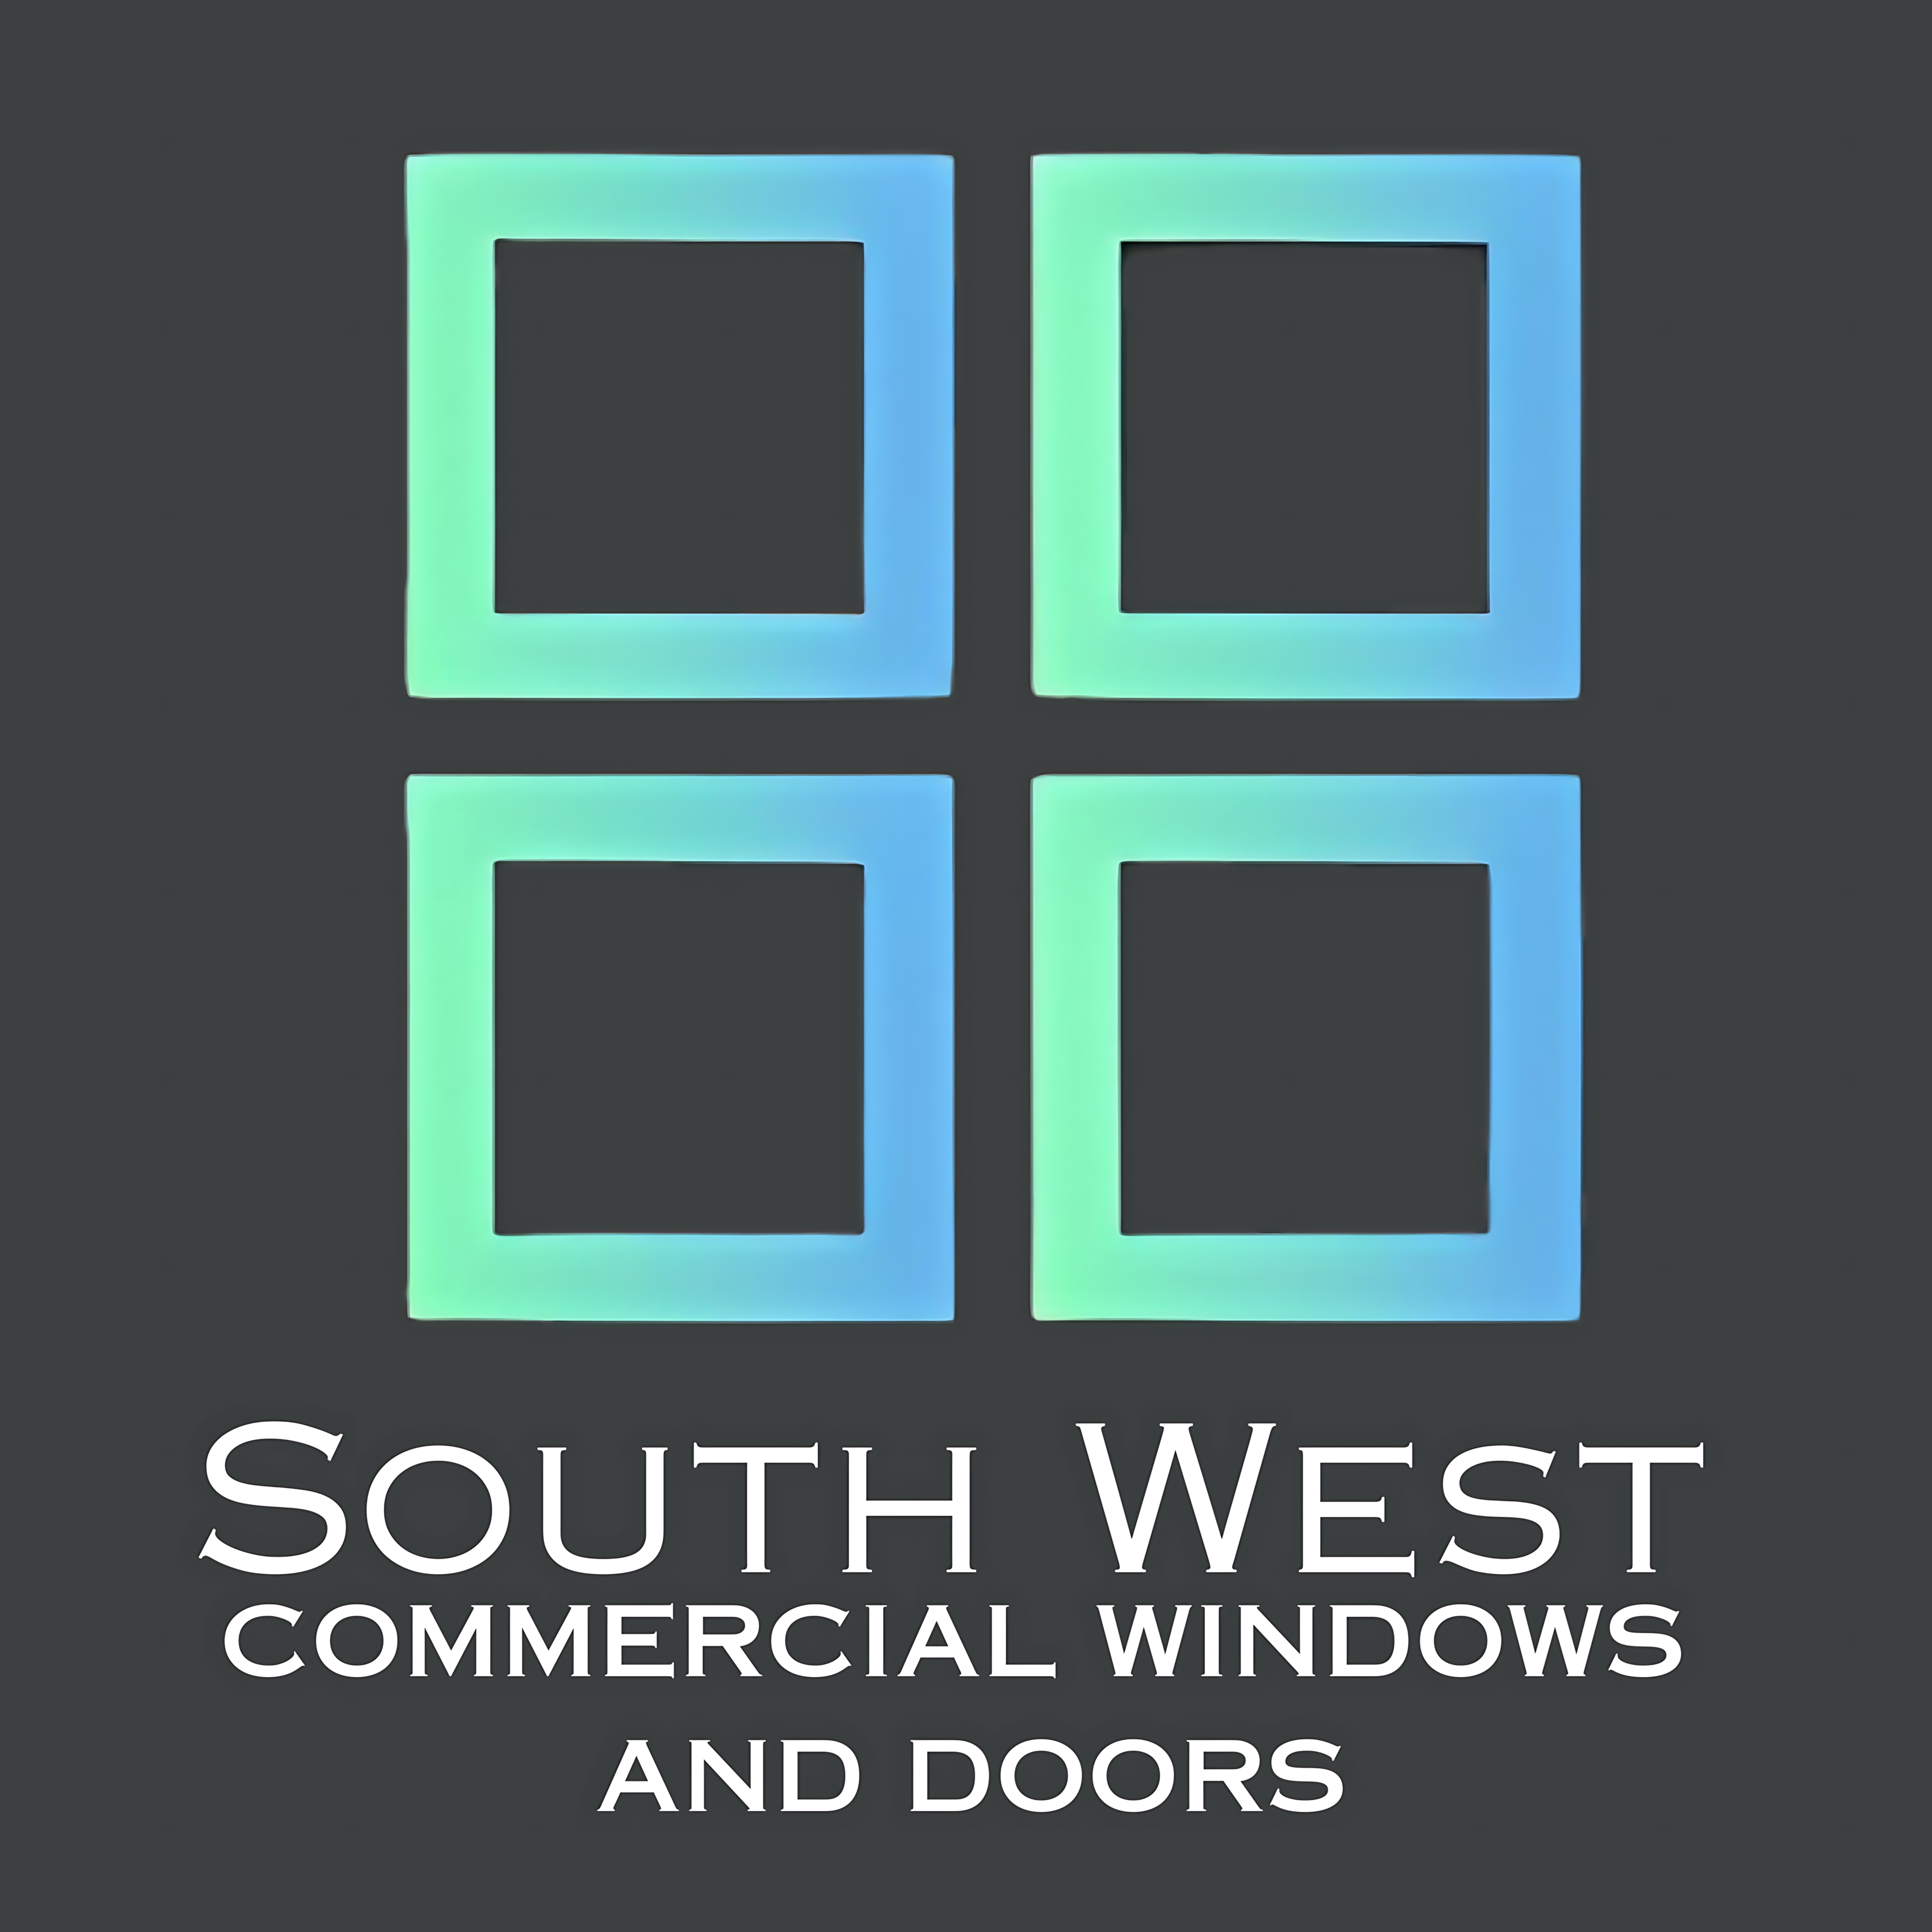 South West Commercial Windows & Doors